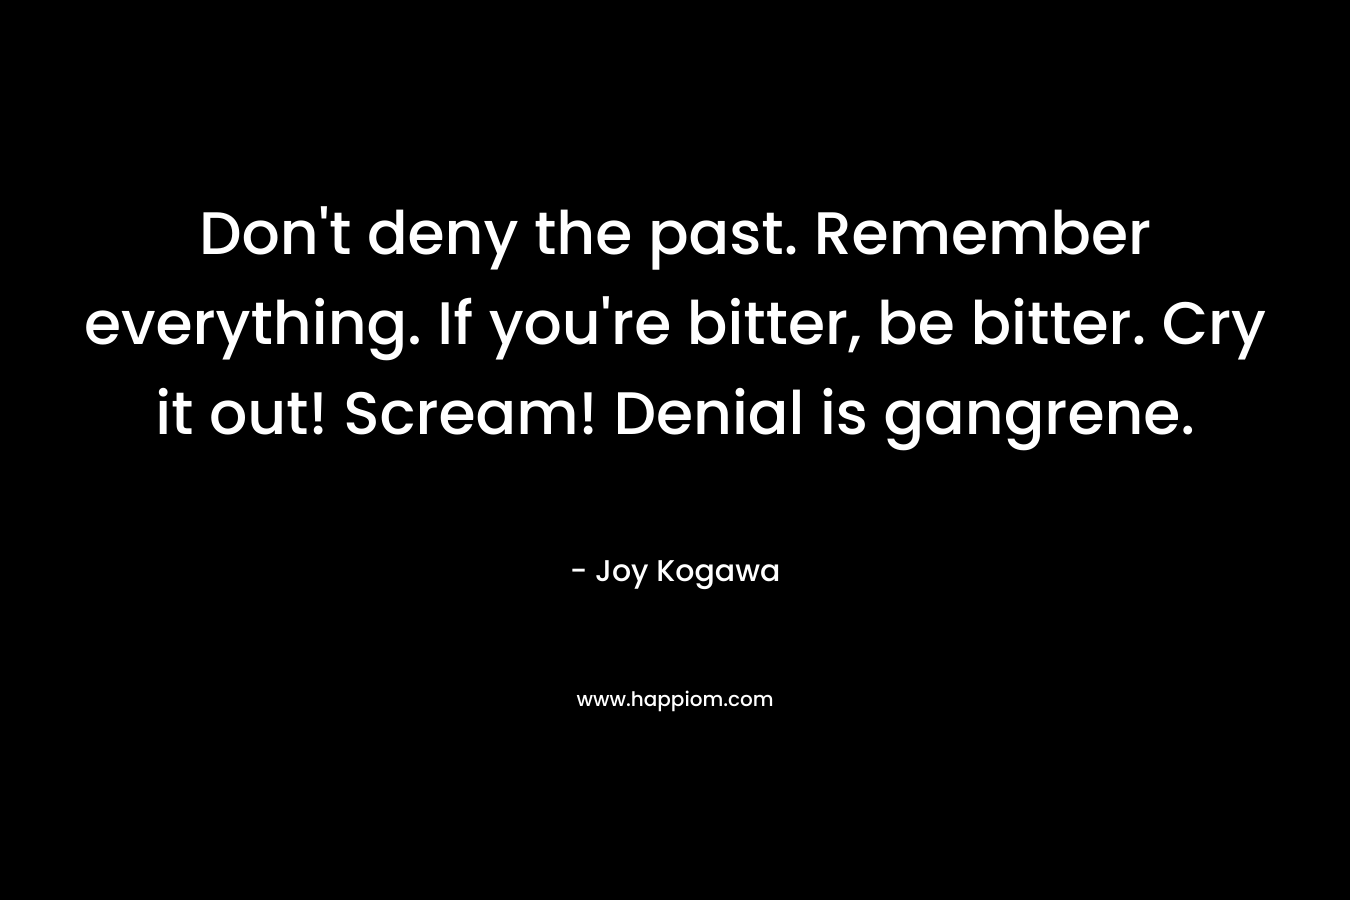 Don't deny the past. Remember everything. If you're bitter, be bitter. Cry it out! Scream! Denial is gangrene.